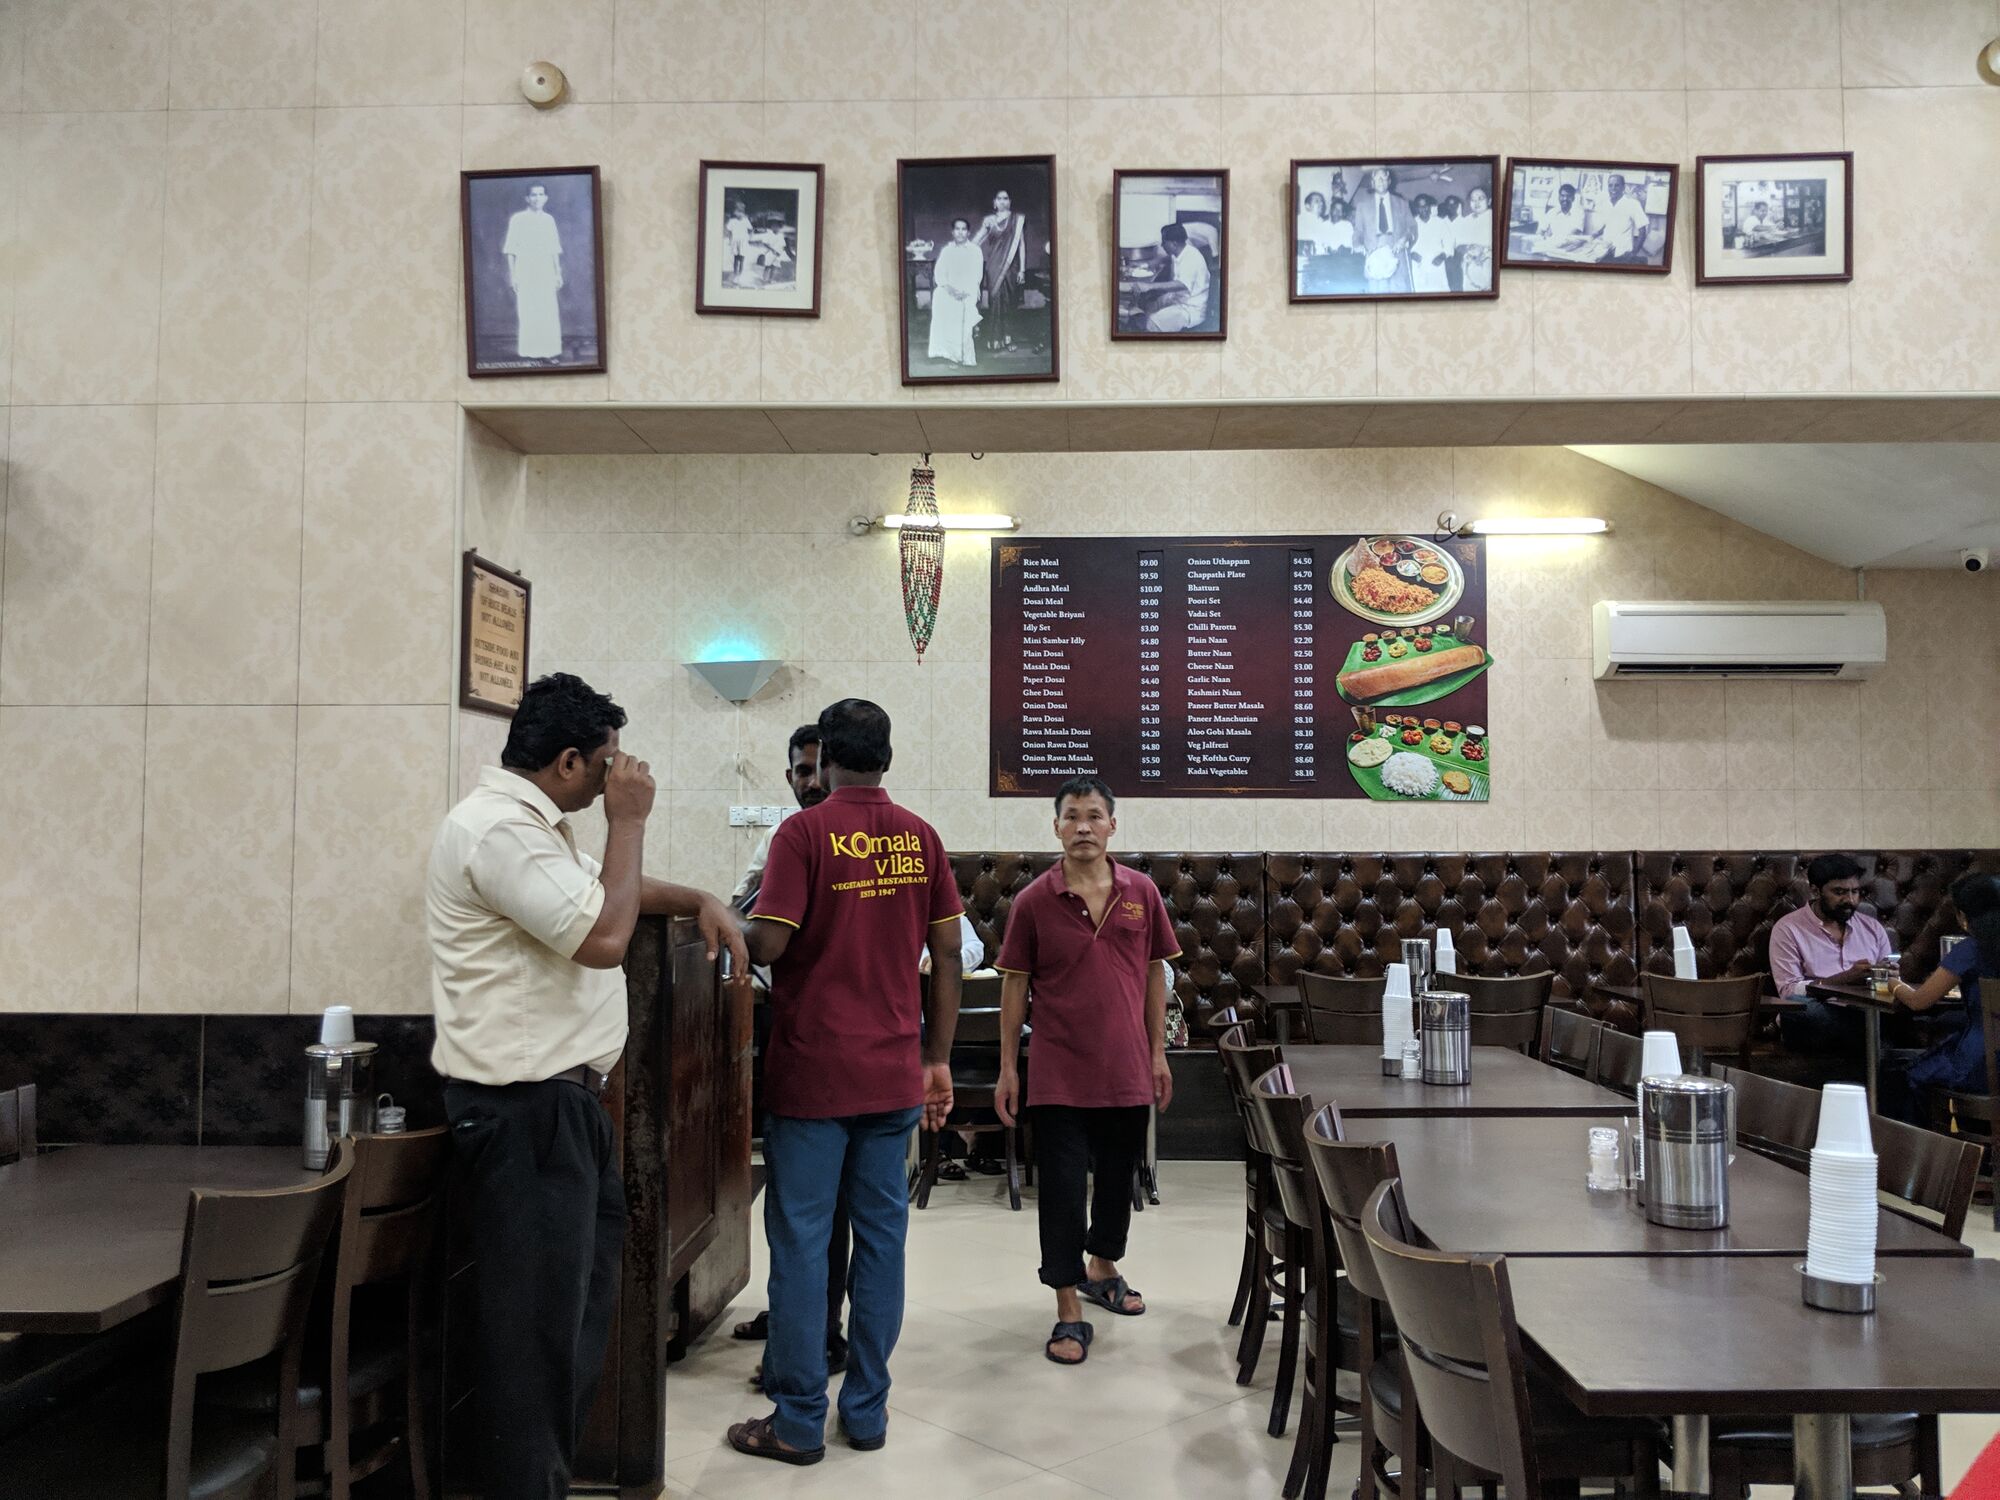 The first-floor "meals" section at the Komala Vilas Vegetarian Restaurant